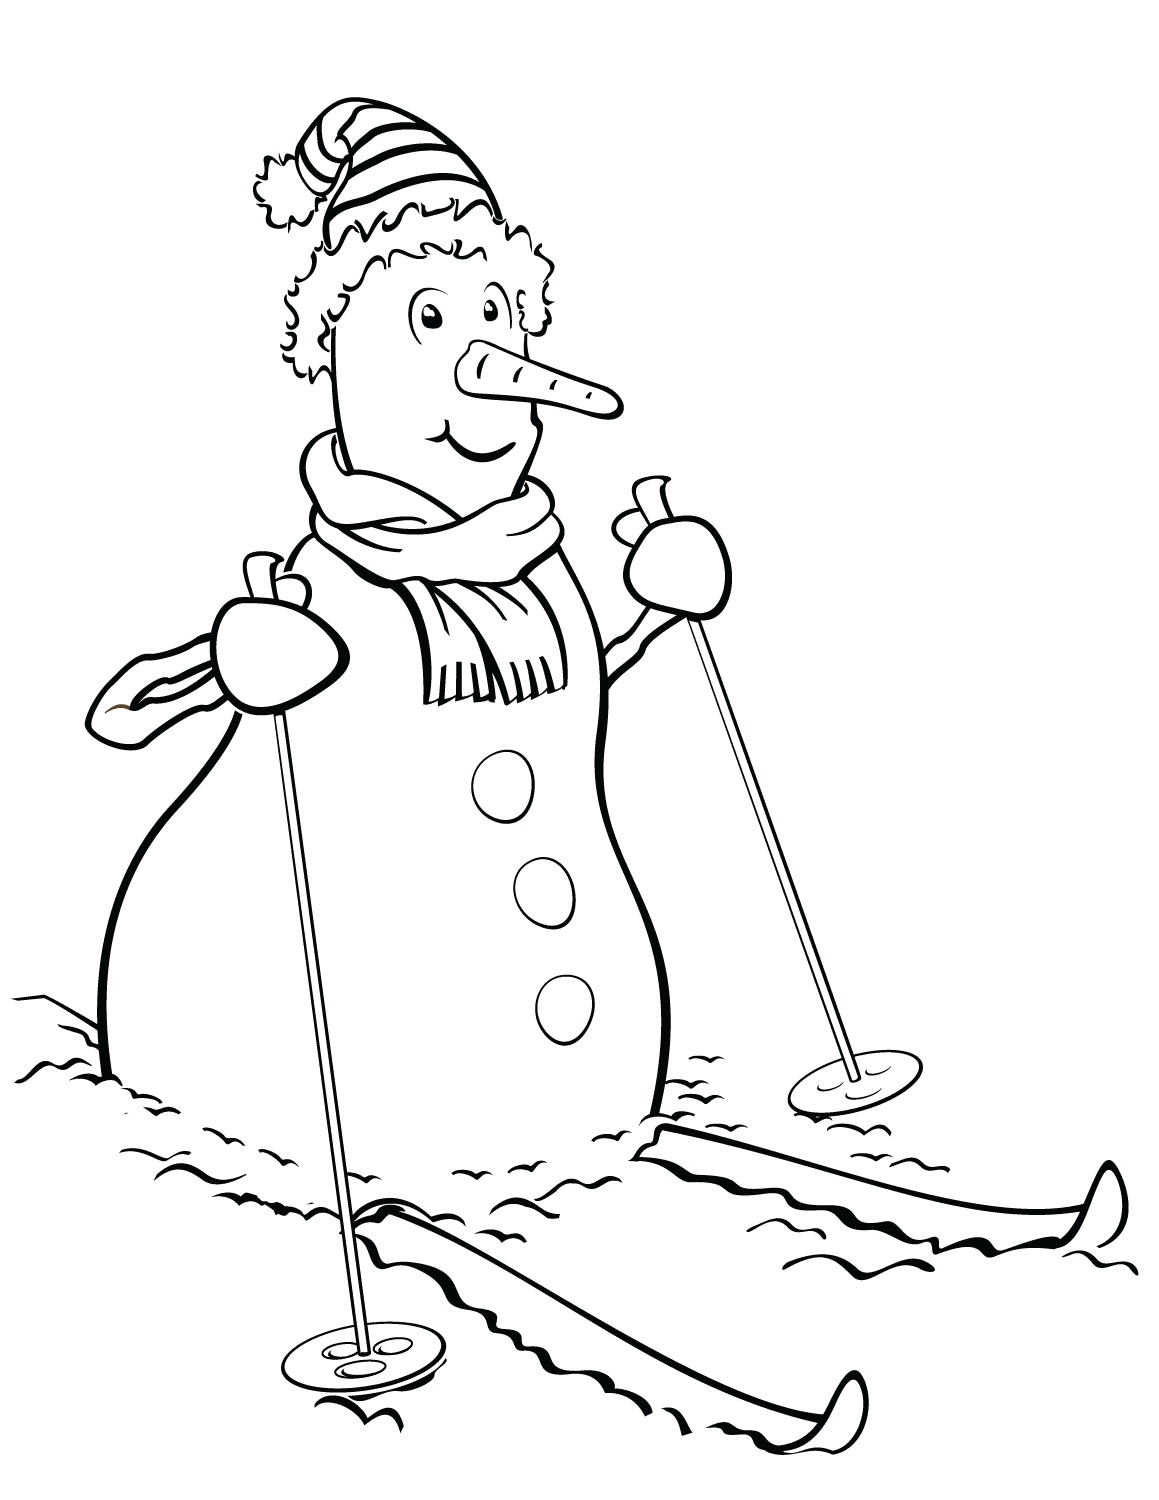 Snowman Loves Skiing Coloring Page